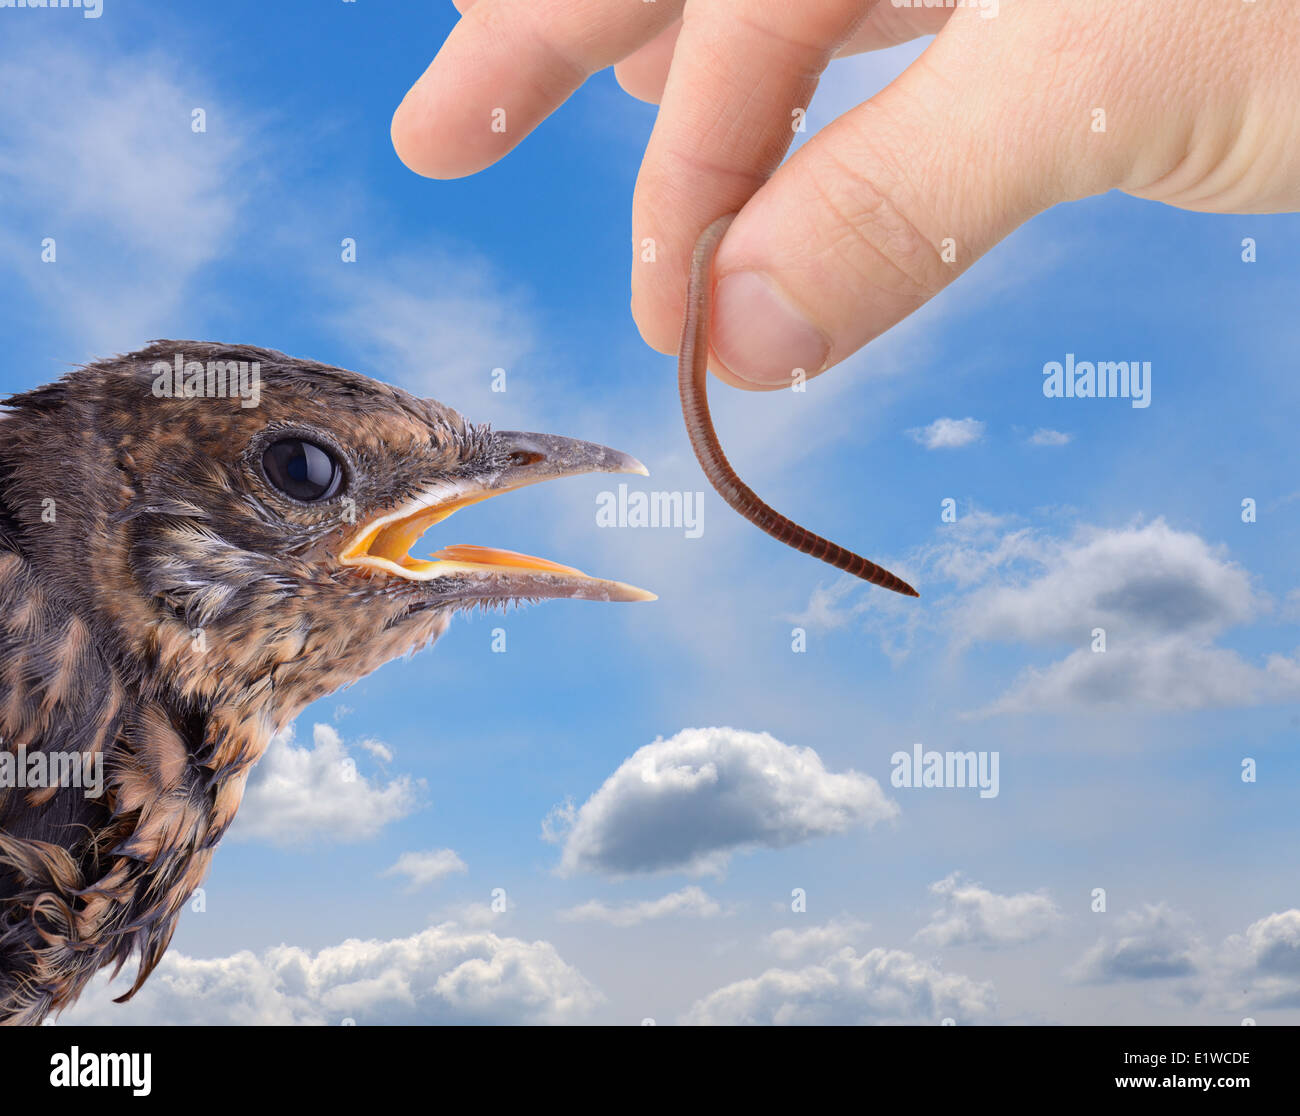 concept of temptation or the early bird catches the worm Stock Photo